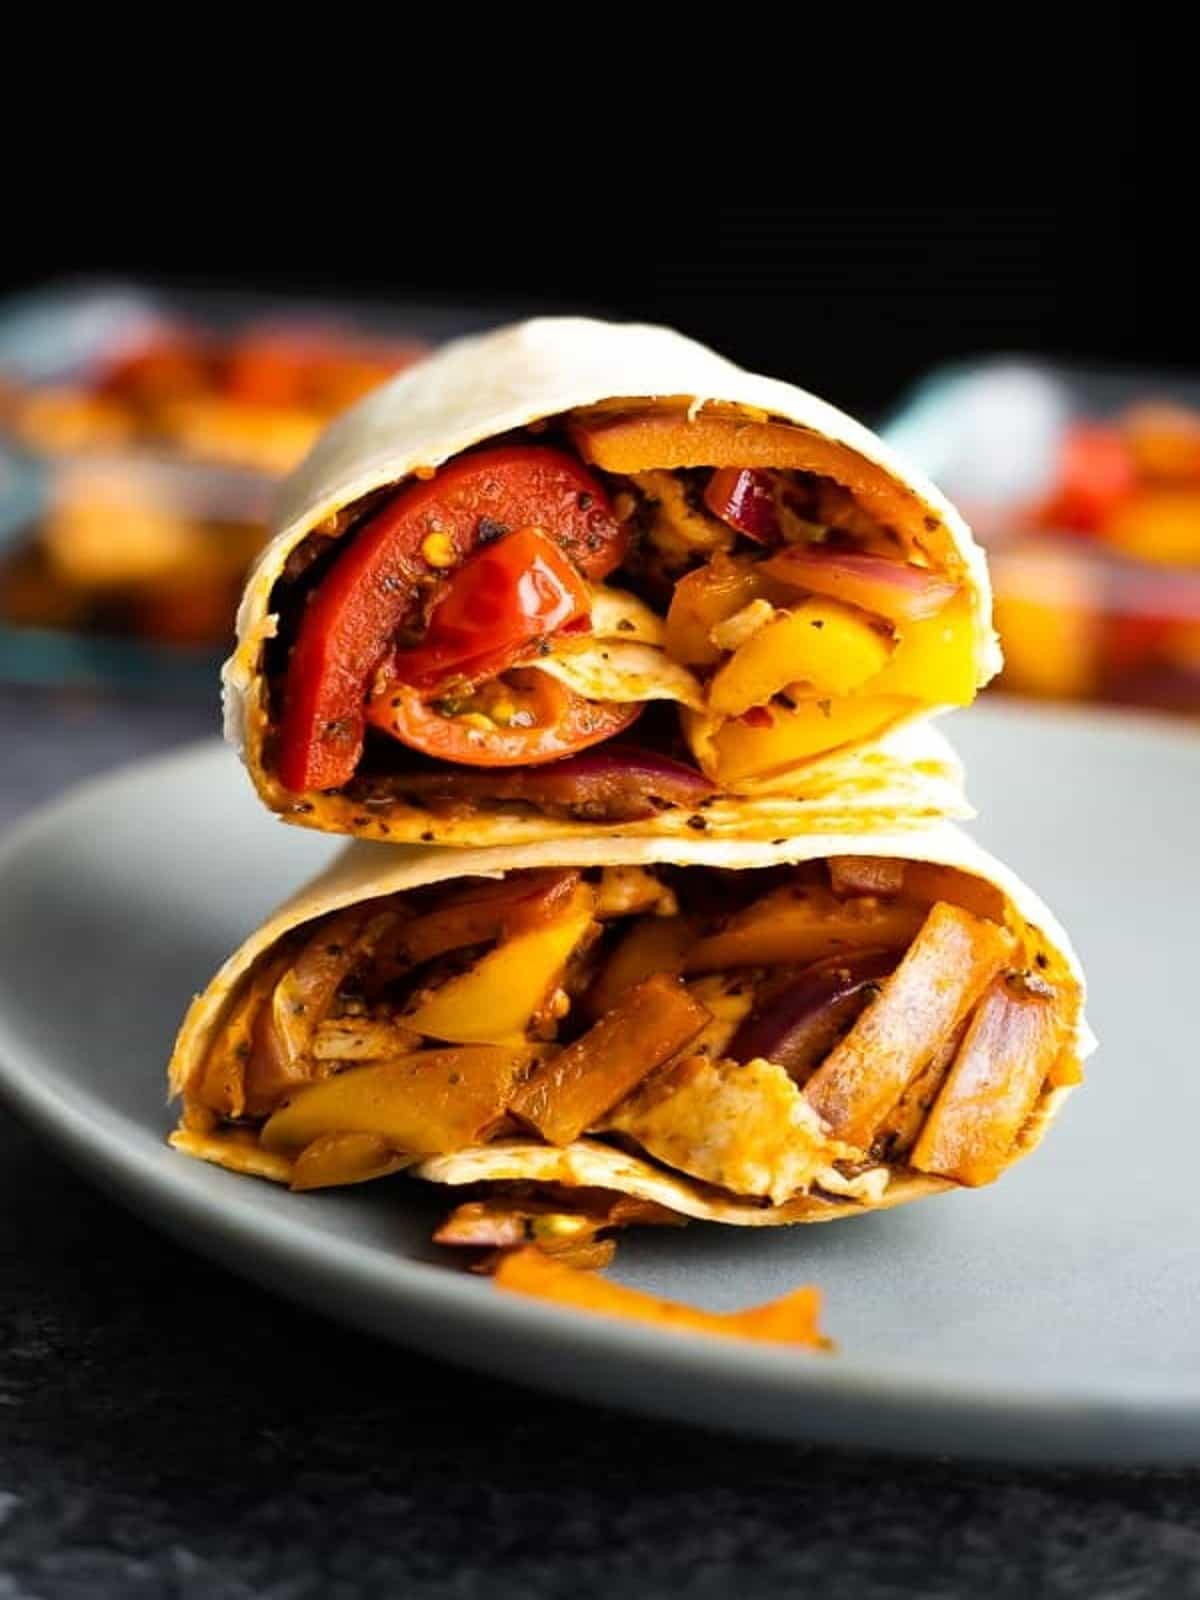 A Cajun chicken wrap is stacked on top of a plate.